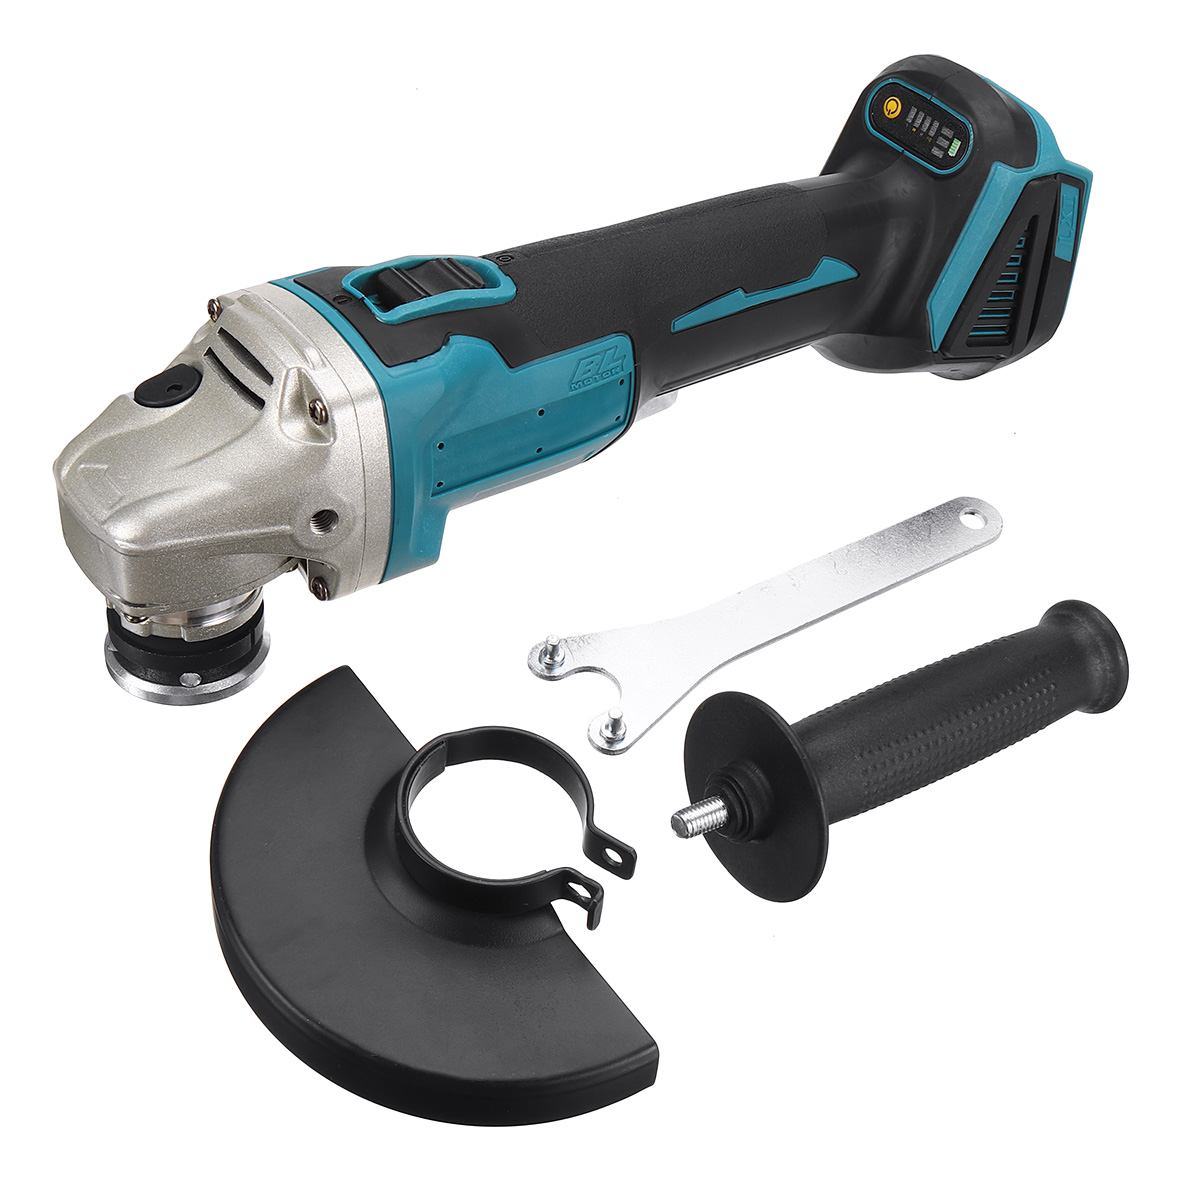 Drillpro-125mm-4-Speed-Regulated-Angle-Grinder-Rechargable-Li-ion-Battery-Brushless-Electric-Grinder-1699793-4